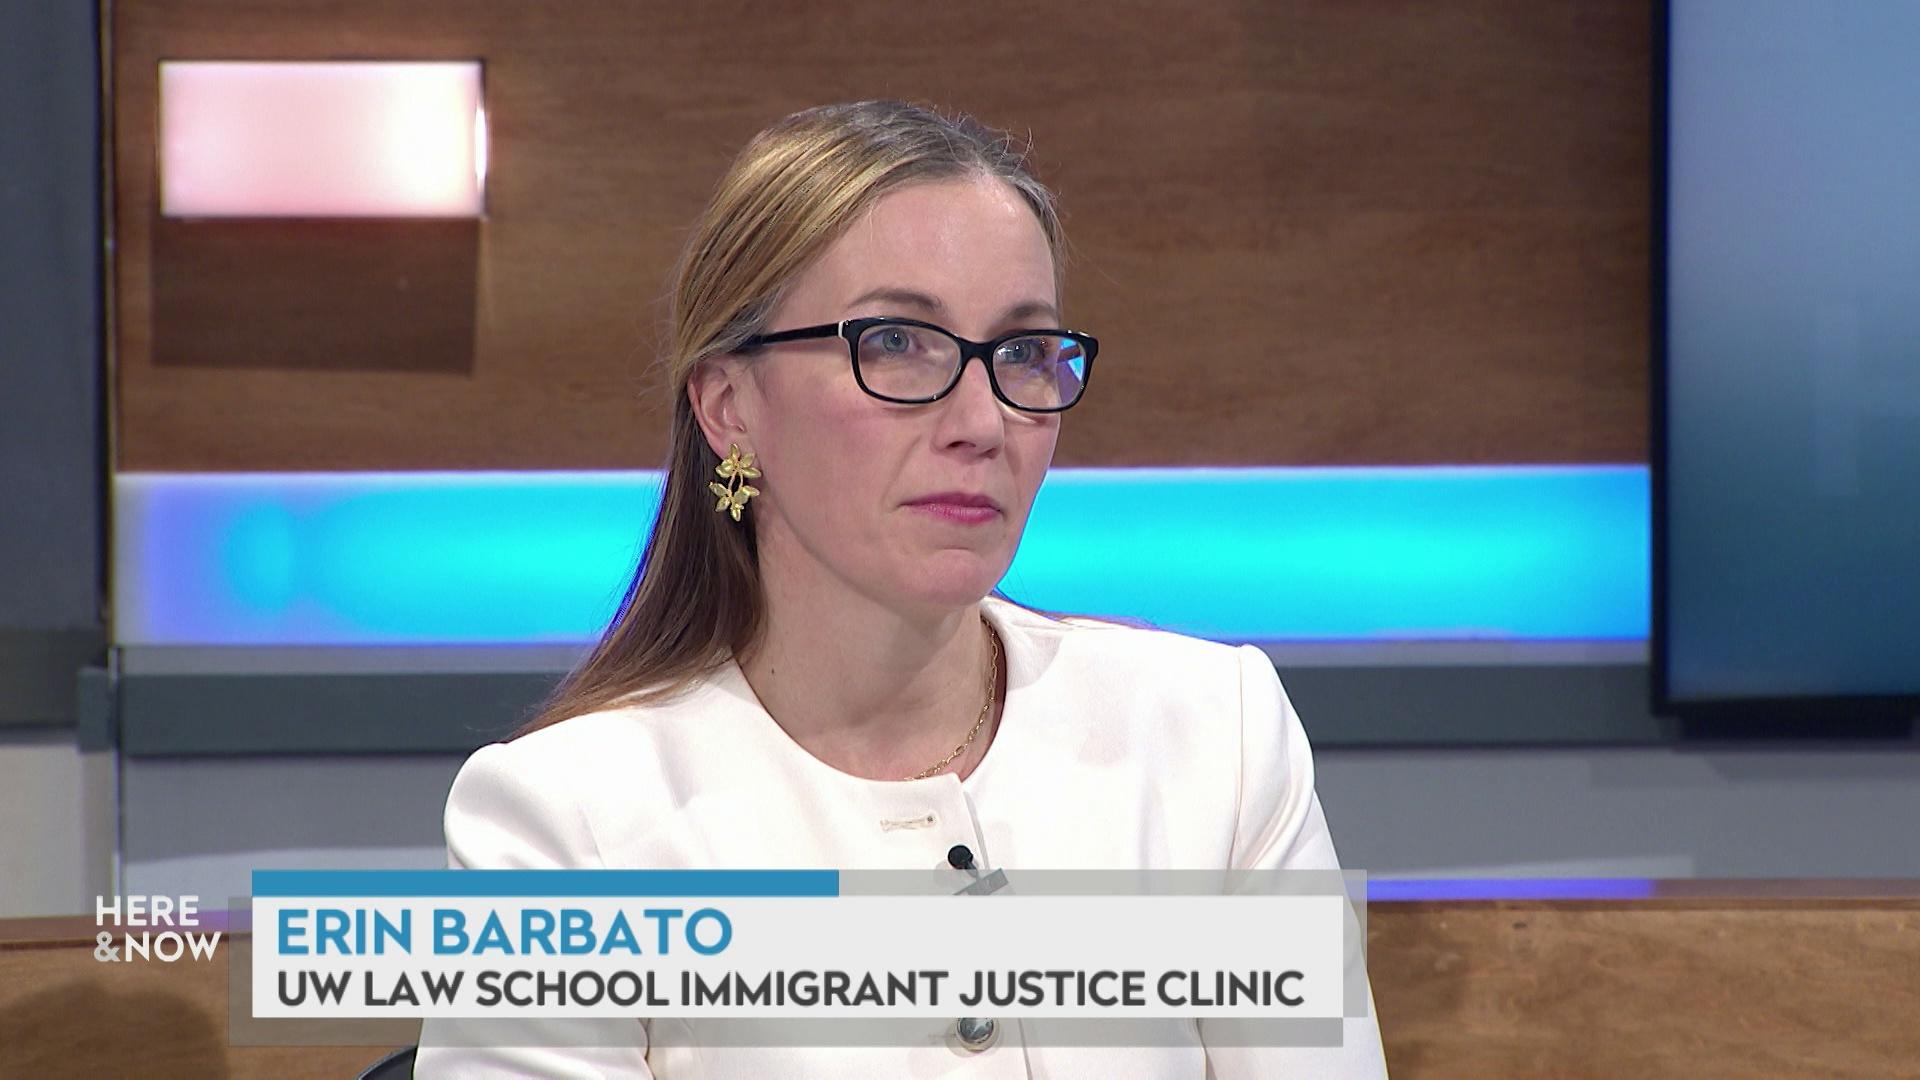 A still image shows Erin Barbato seated at the 'Here & Now' set featuring wood paneling, with a graphic at bottom reading 'Erin Barbato' and 'UW Law School Immigrant Justice Clinic.'